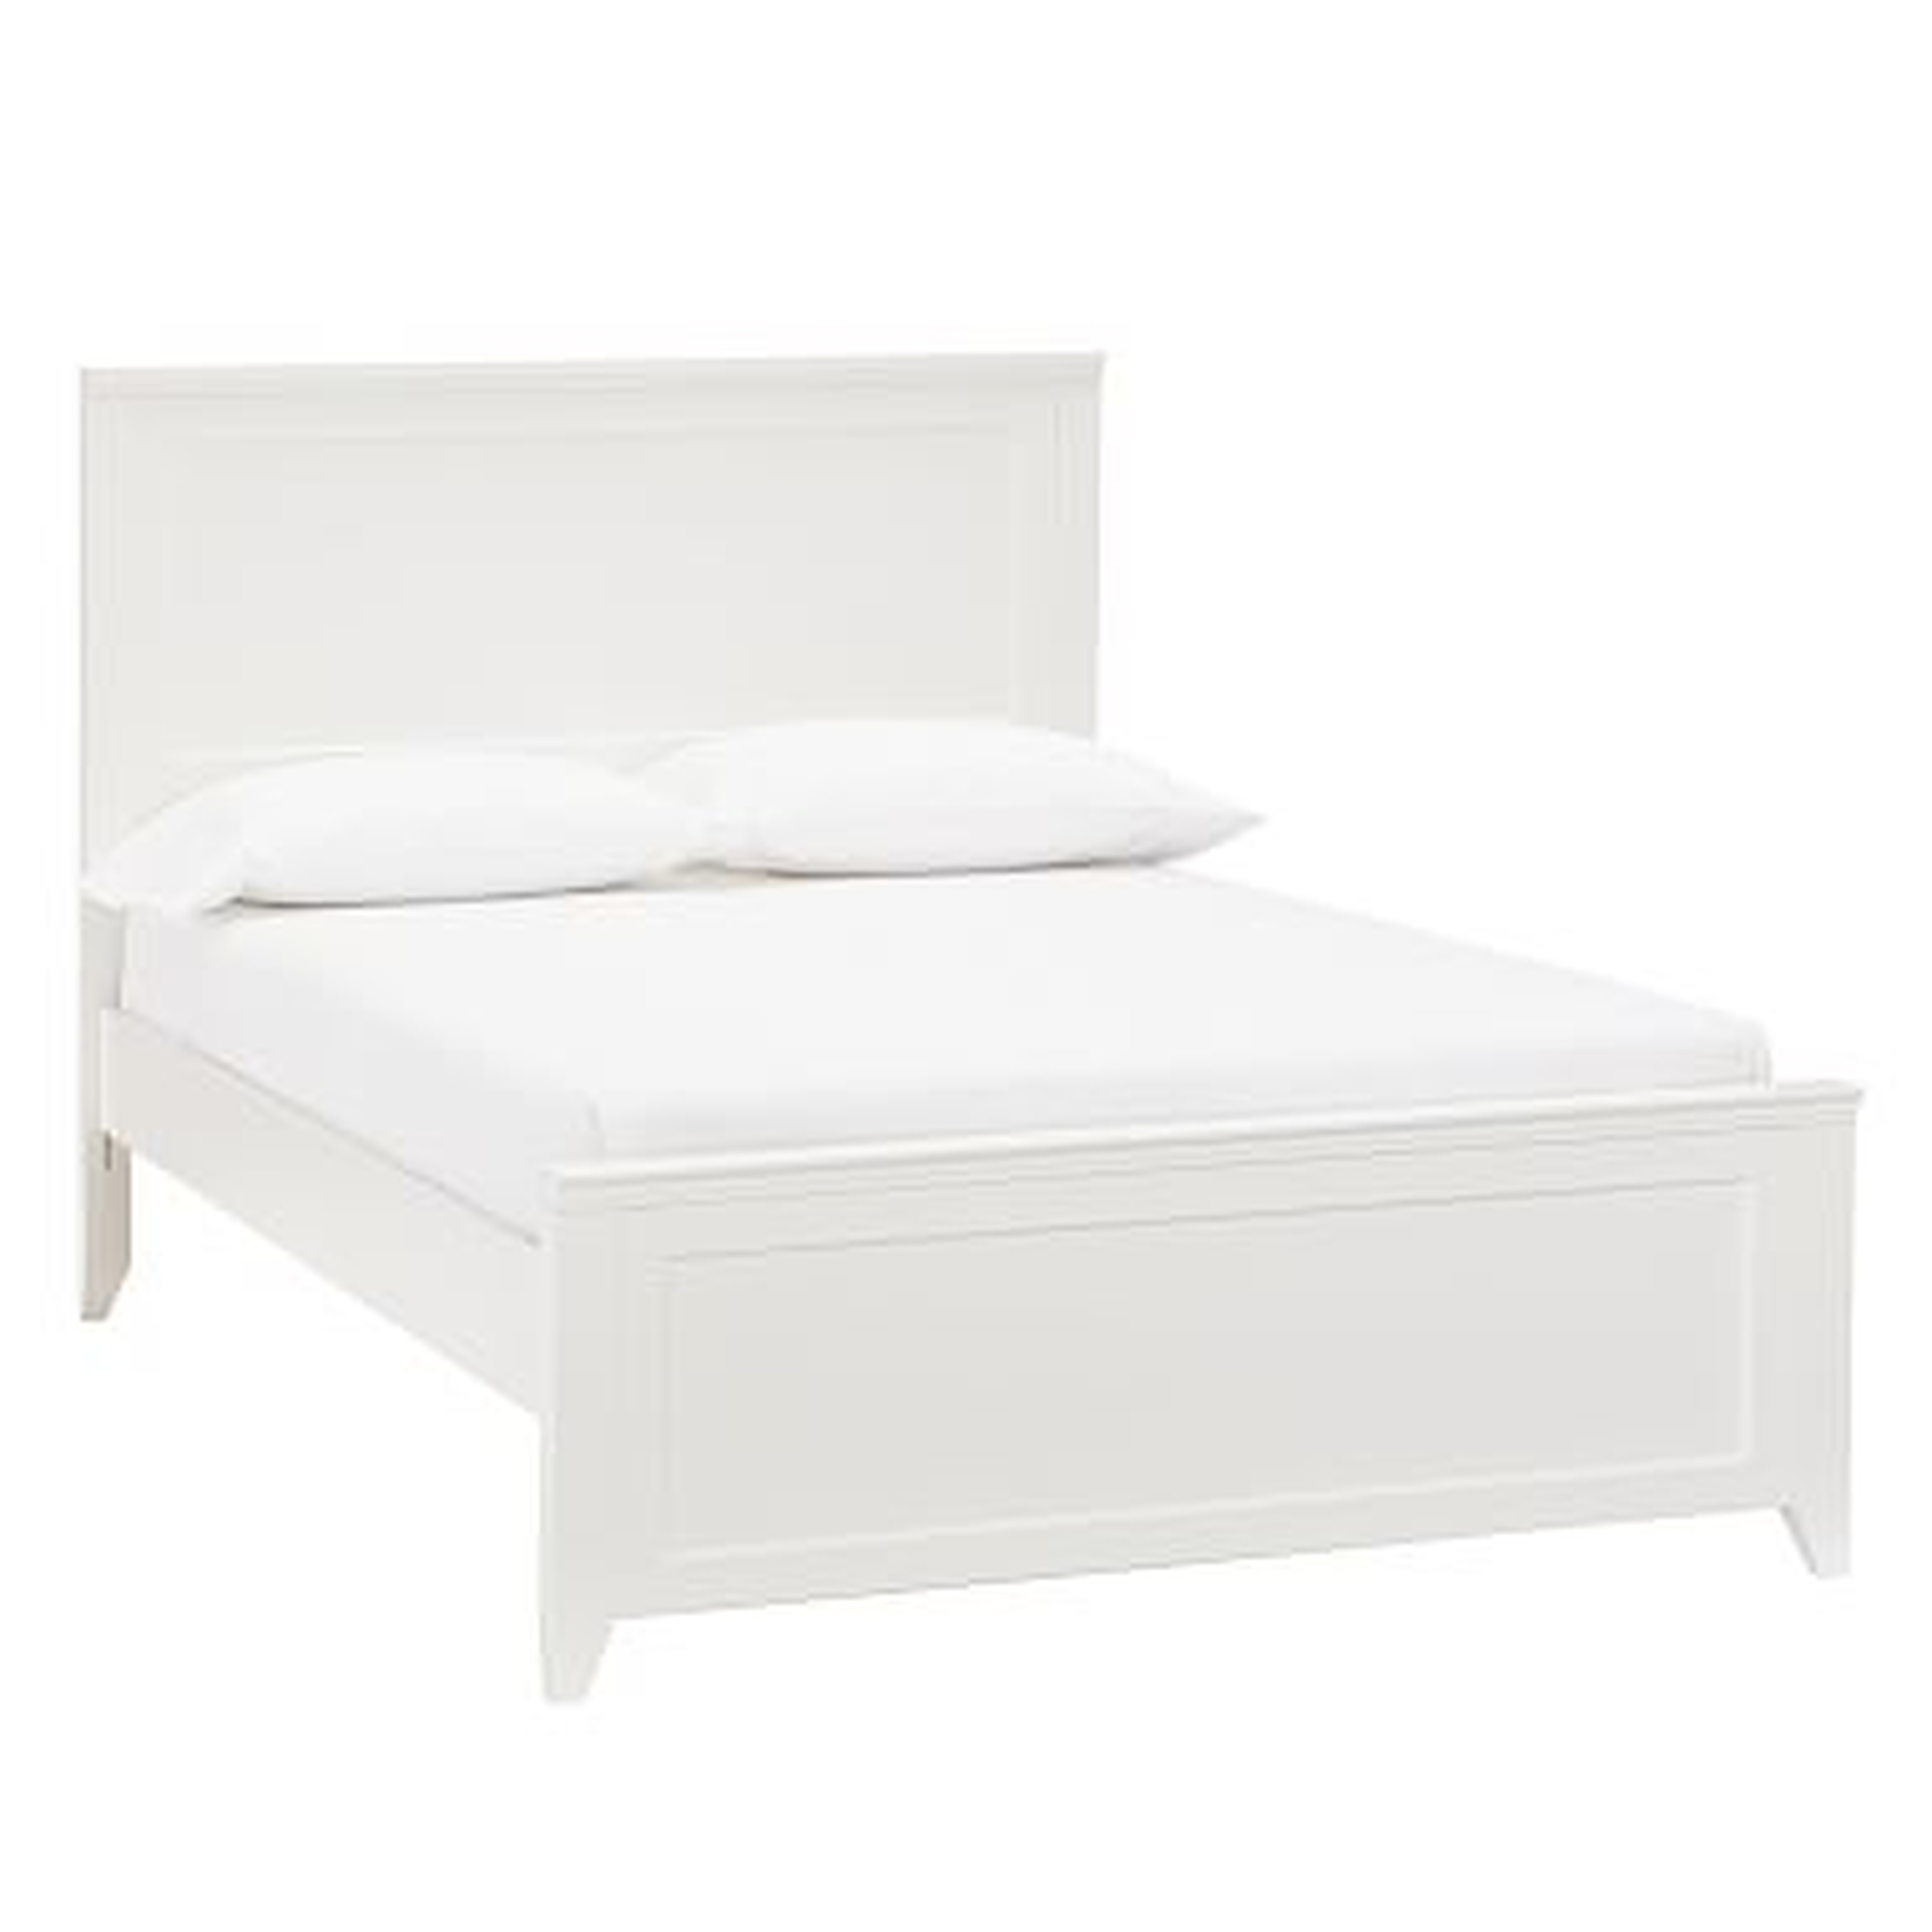 Hampton Classic Bed, Queen, Simply White - Pottery Barn Teen